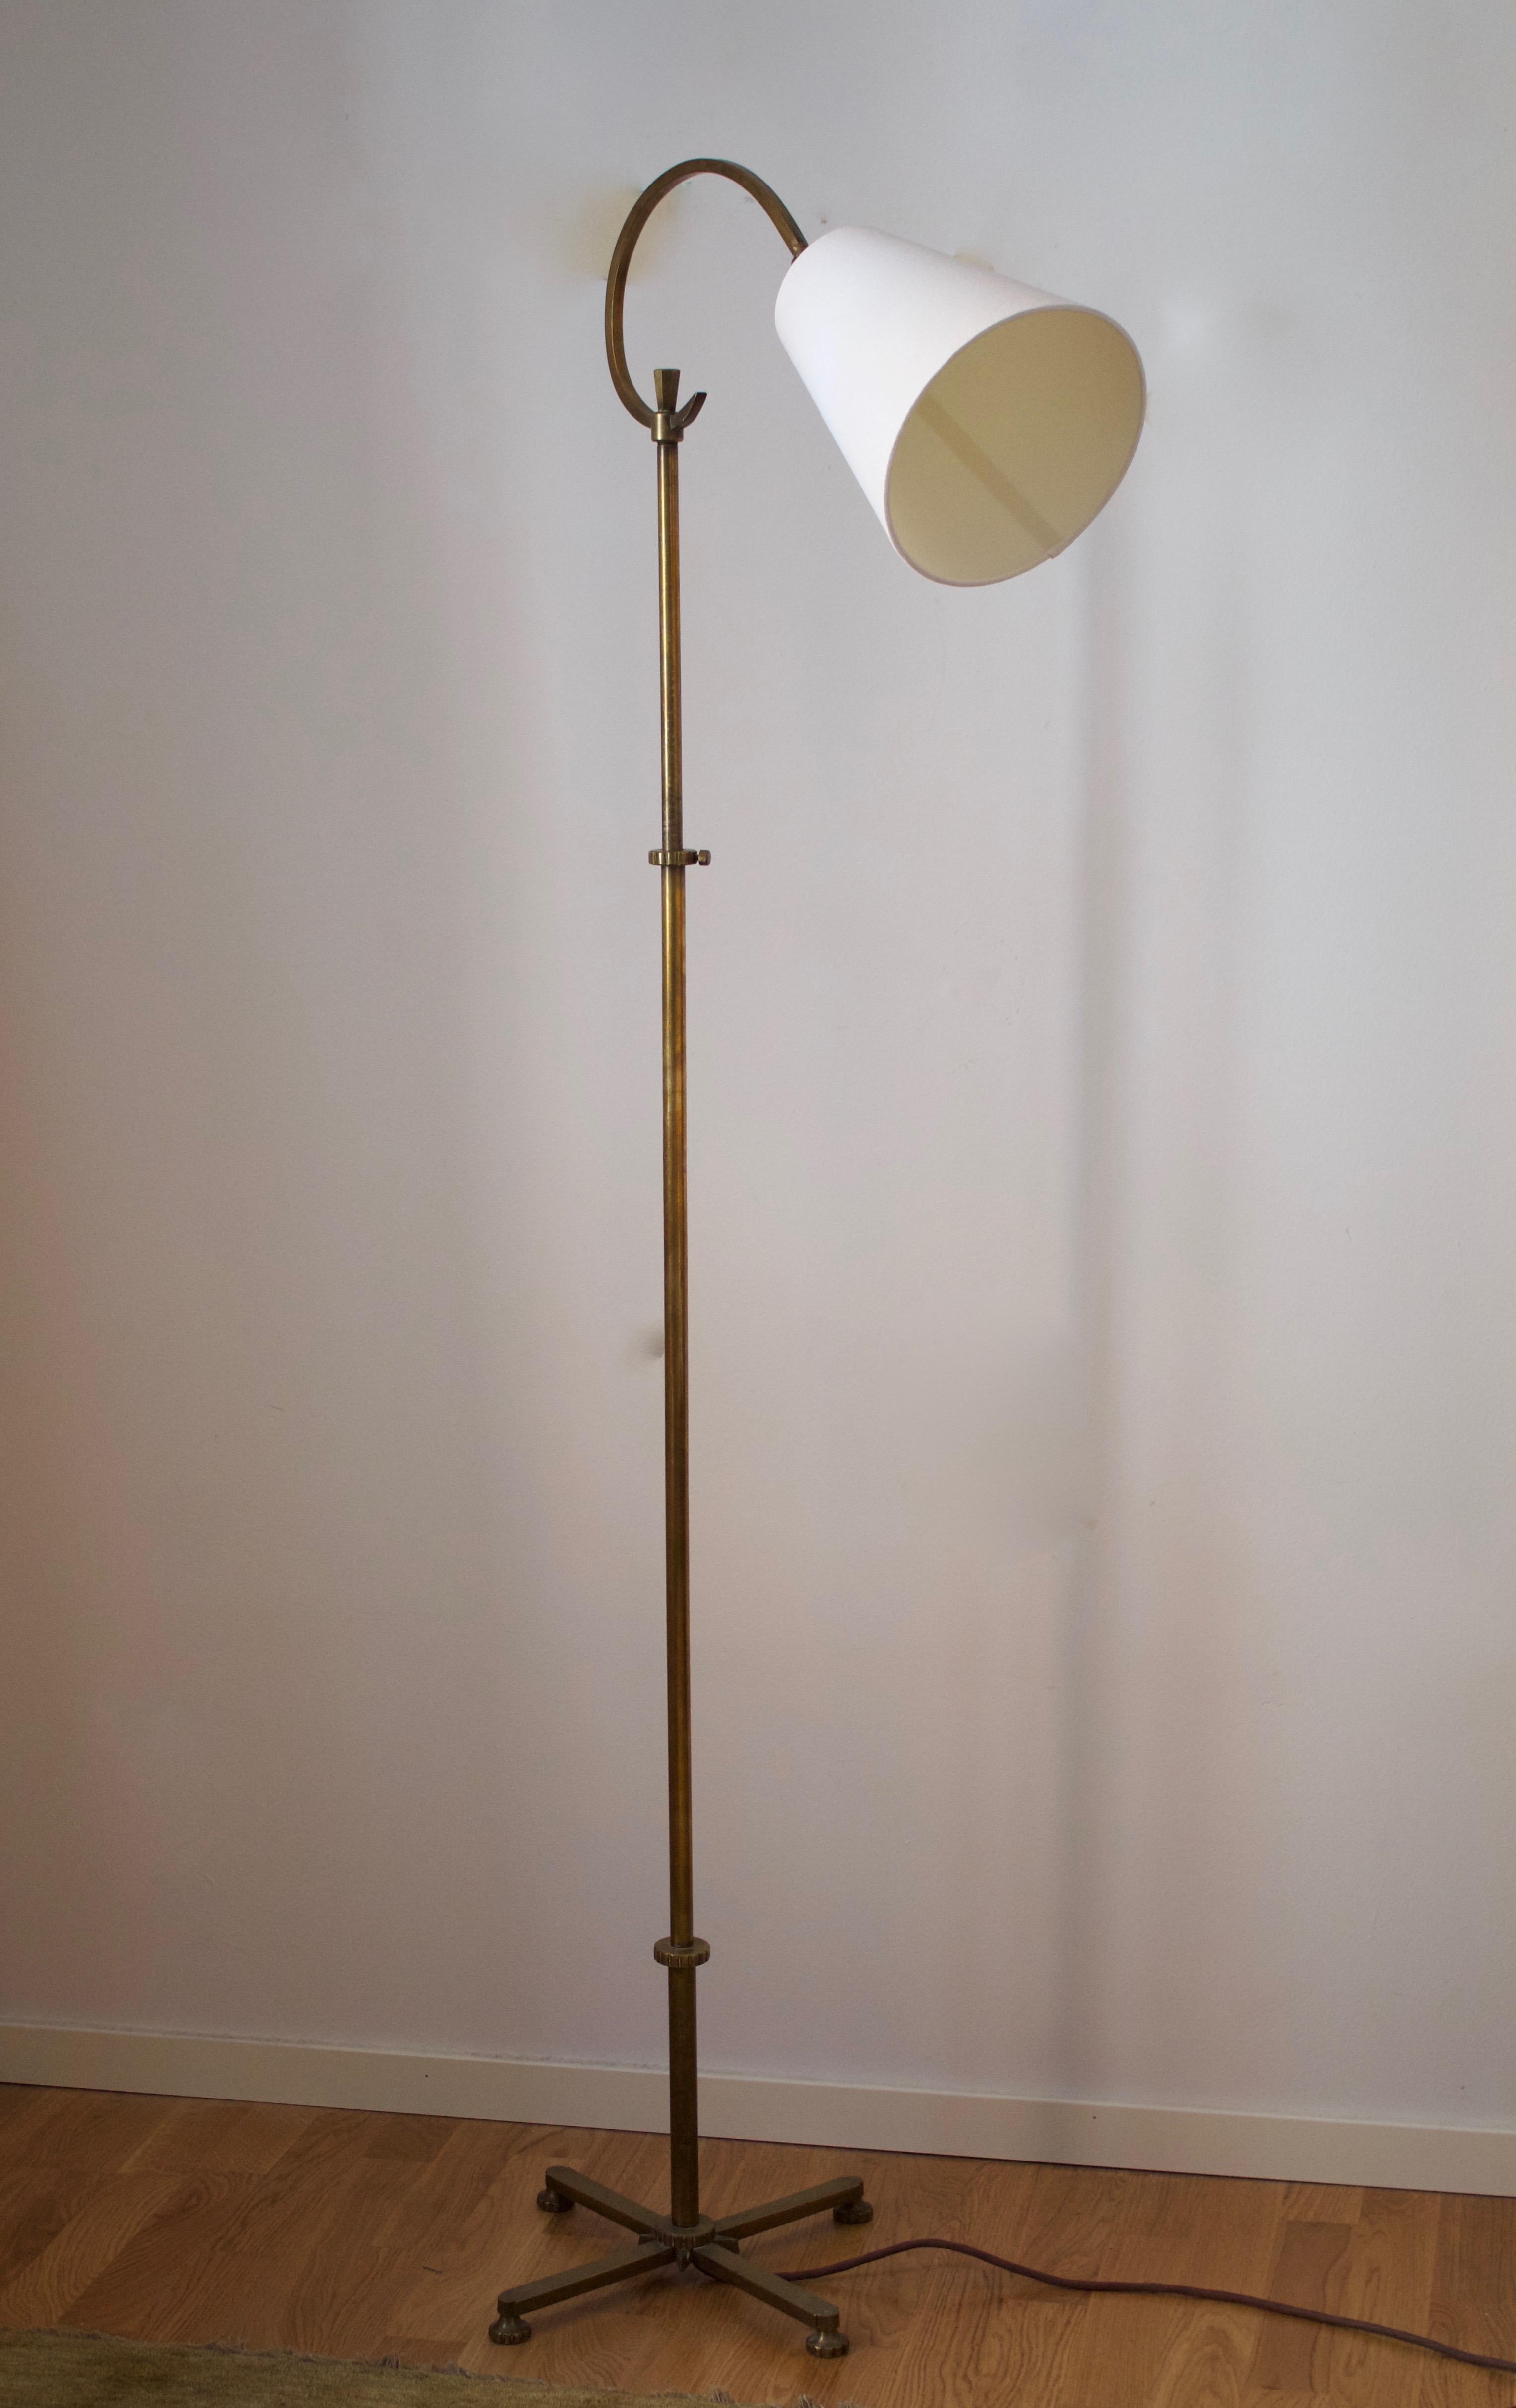 An adjustable floor lamp. Designed and produced in Sweden 1940s. With a brand new lampshade.